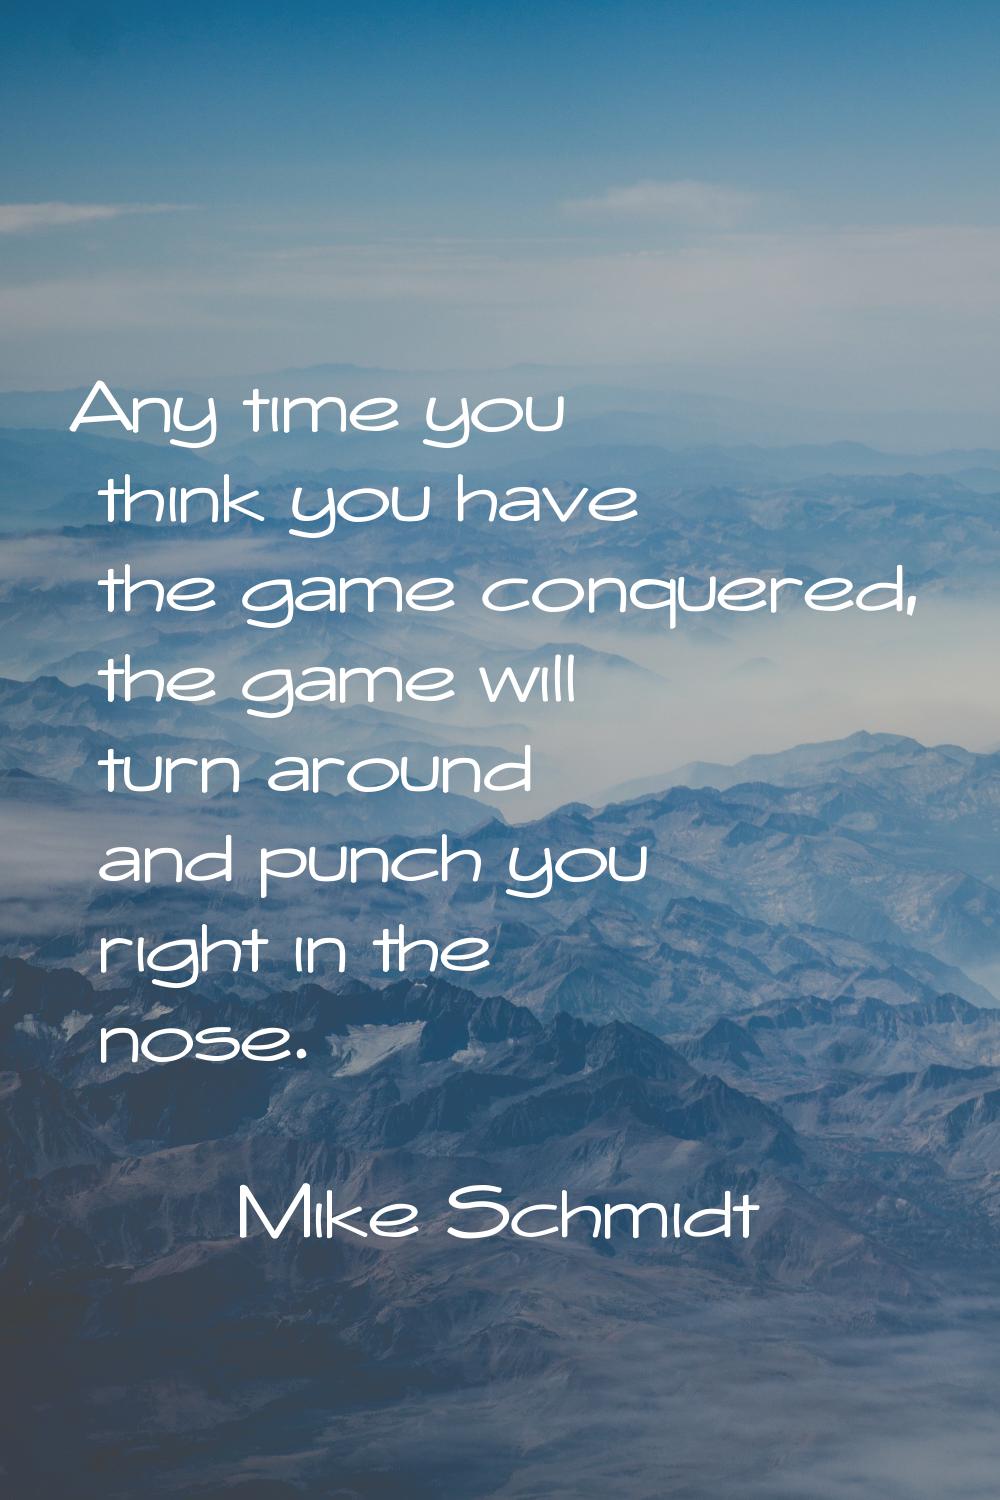 Any time you think you have the game conquered, the game will turn around and punch you right in th